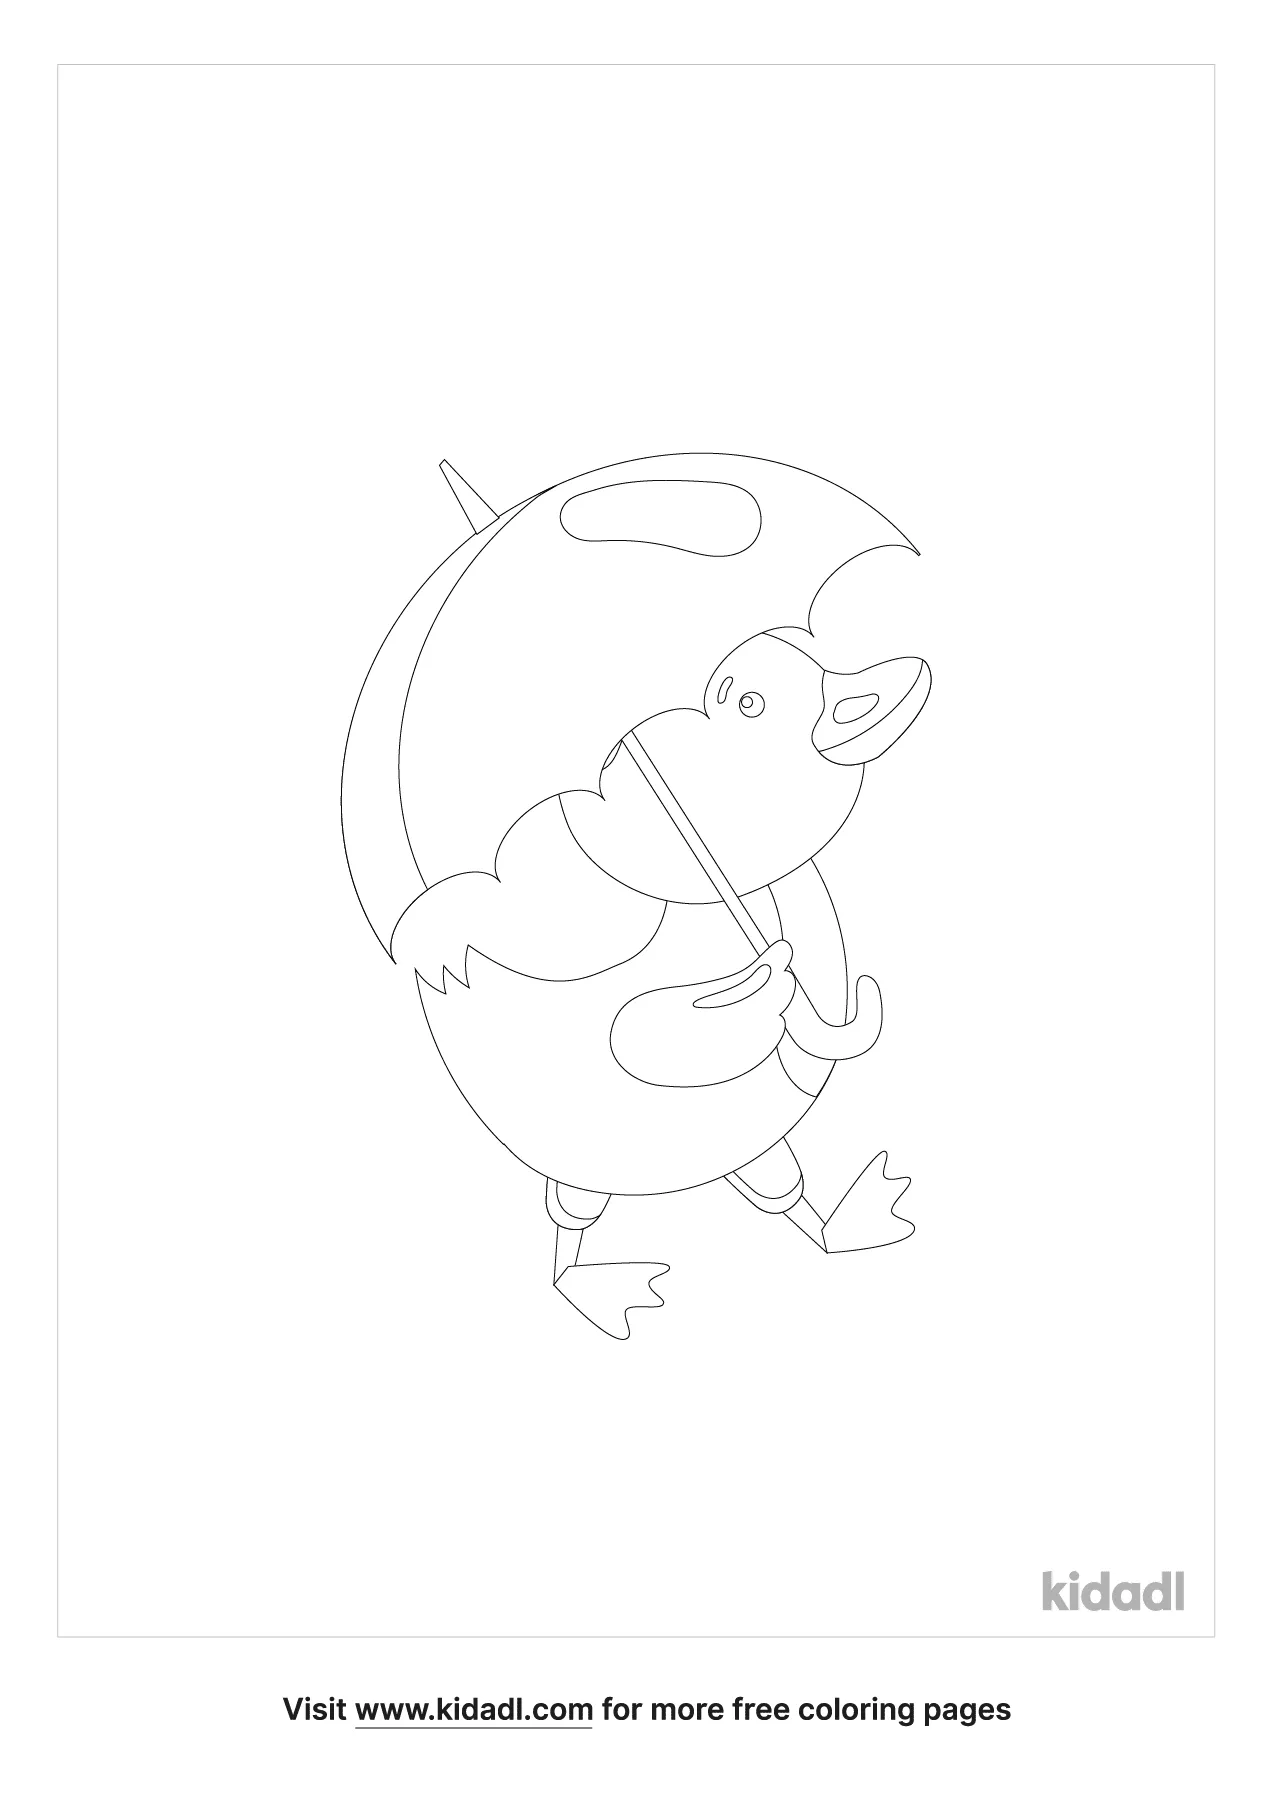 Free duck with umbrella coloring page coloring page printables